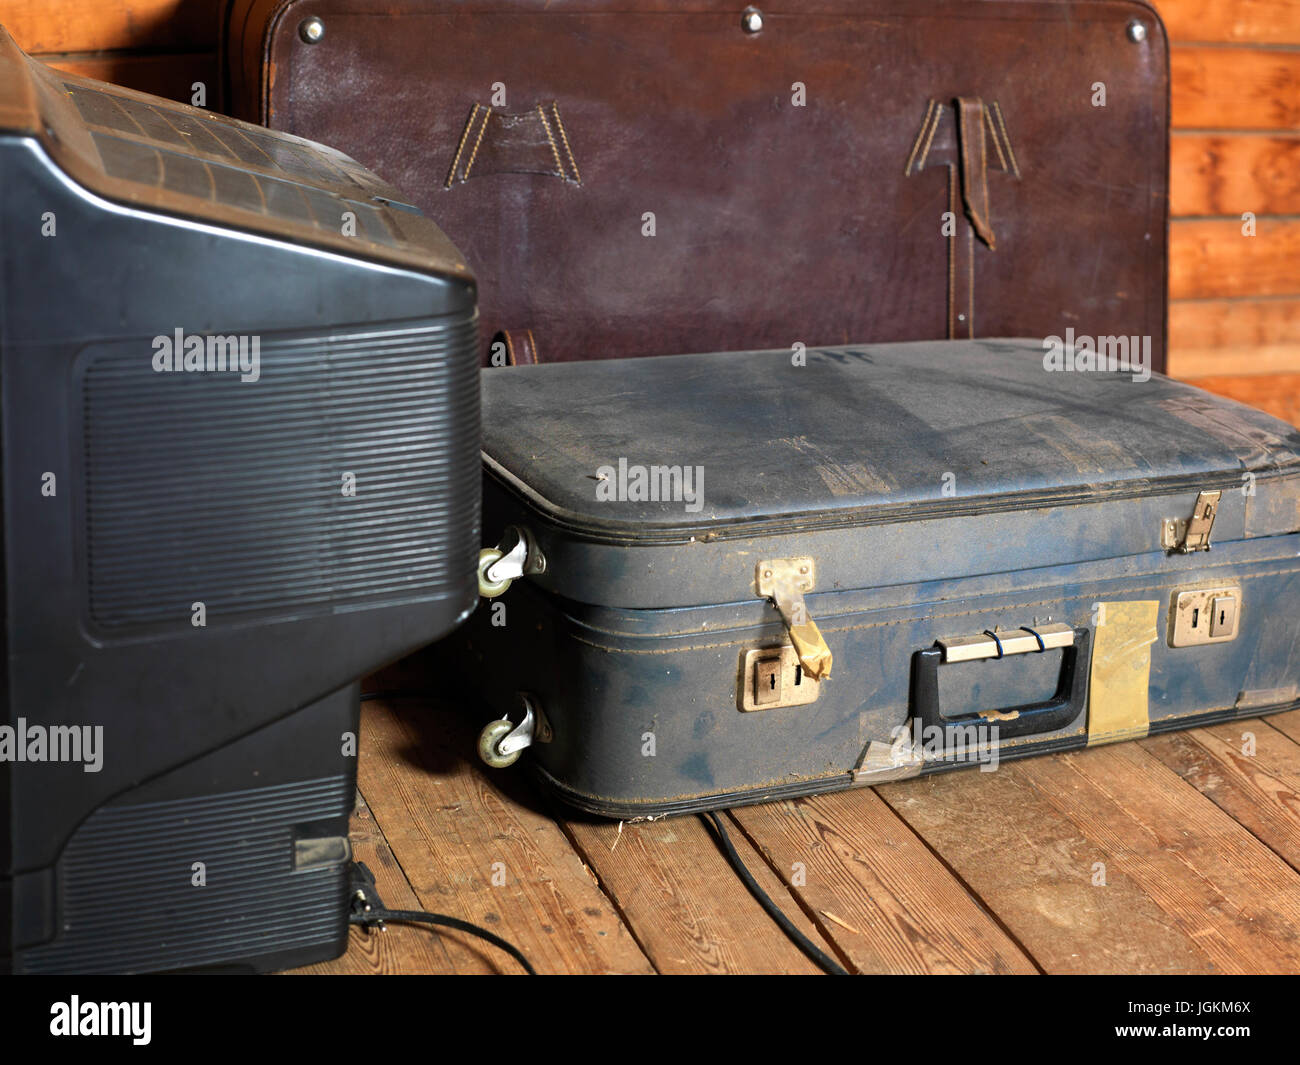 Abandoned old suitcases and TV set on the wooden floor, indoor cropped image Stock Photo